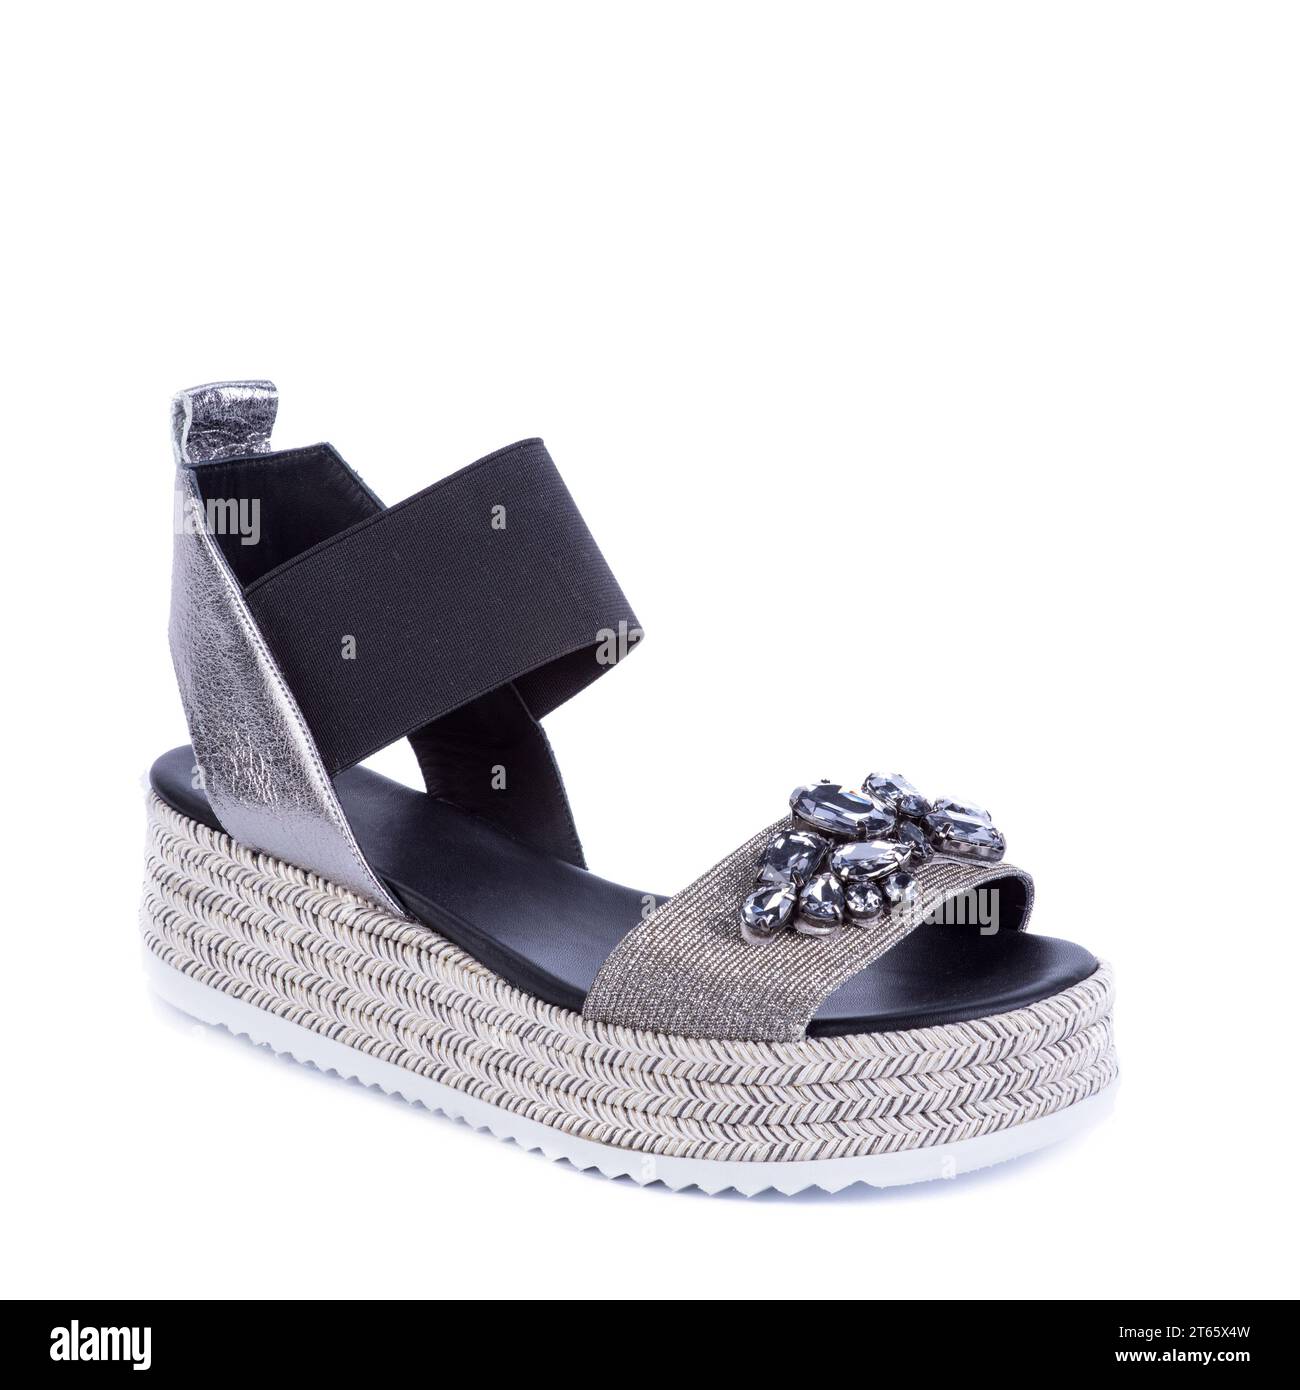 Stylish black-silver sandal decorated with a scattering of rhinestones on white background. Fashion blog. shoe sale marketing campaign Footwear retail Stock Photo